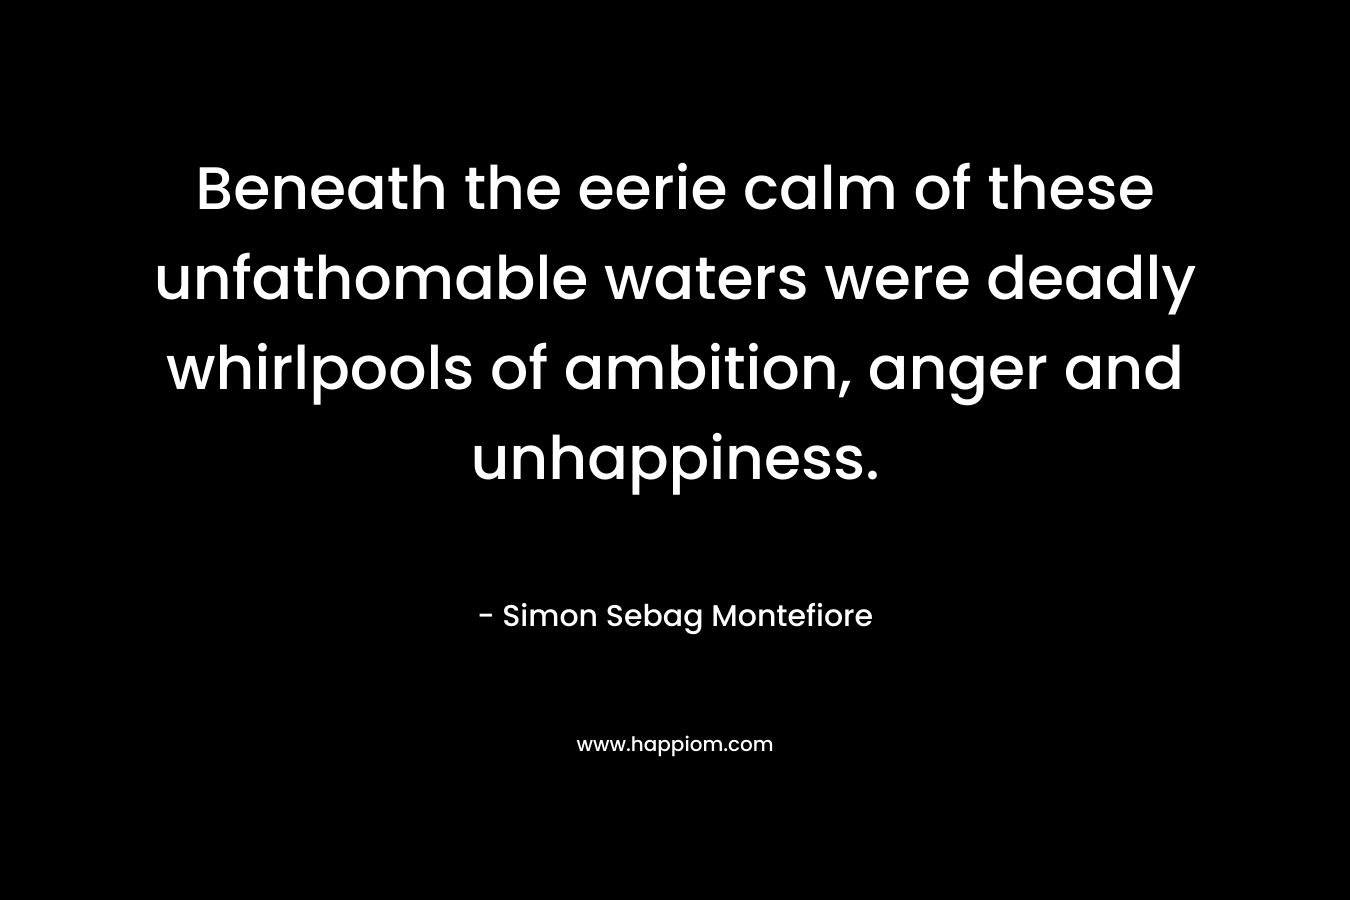 Beneath the eerie calm of these unfathomable waters were deadly whirlpools of ambition, anger and unhappiness. – Simon Sebag Montefiore